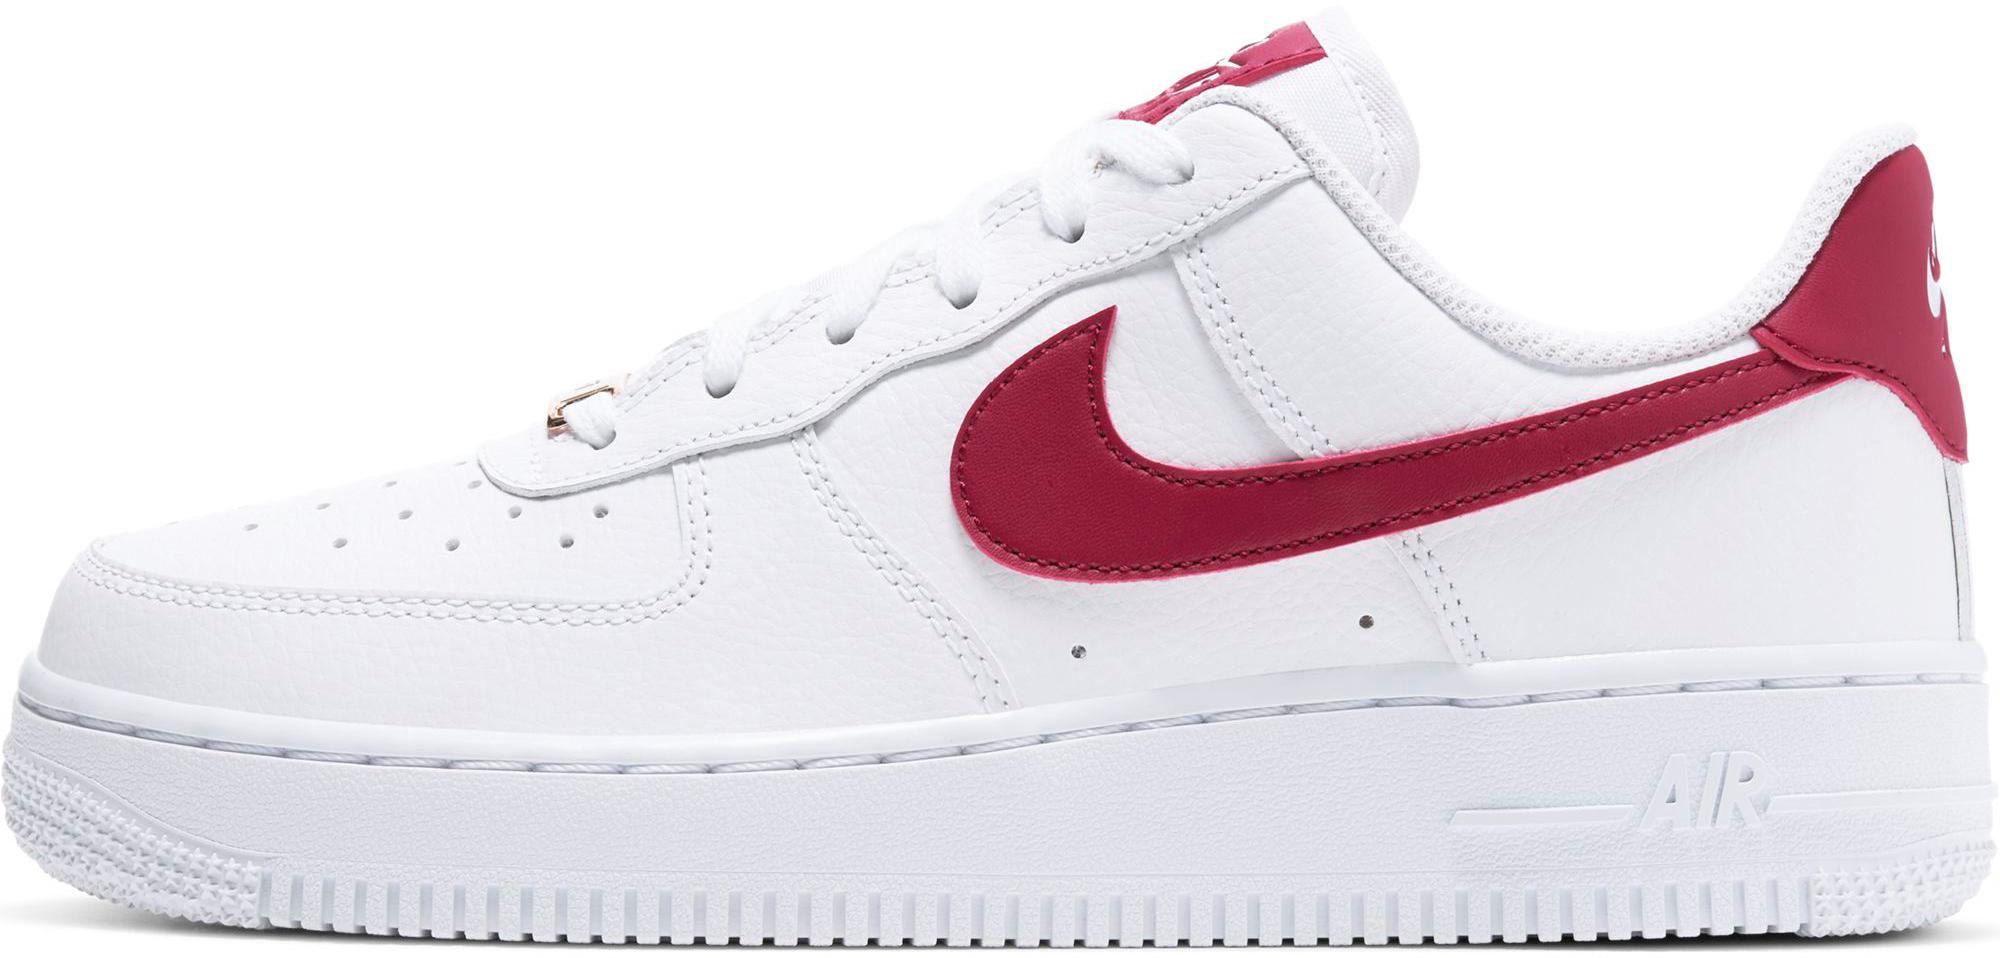 women's white and red air force 1